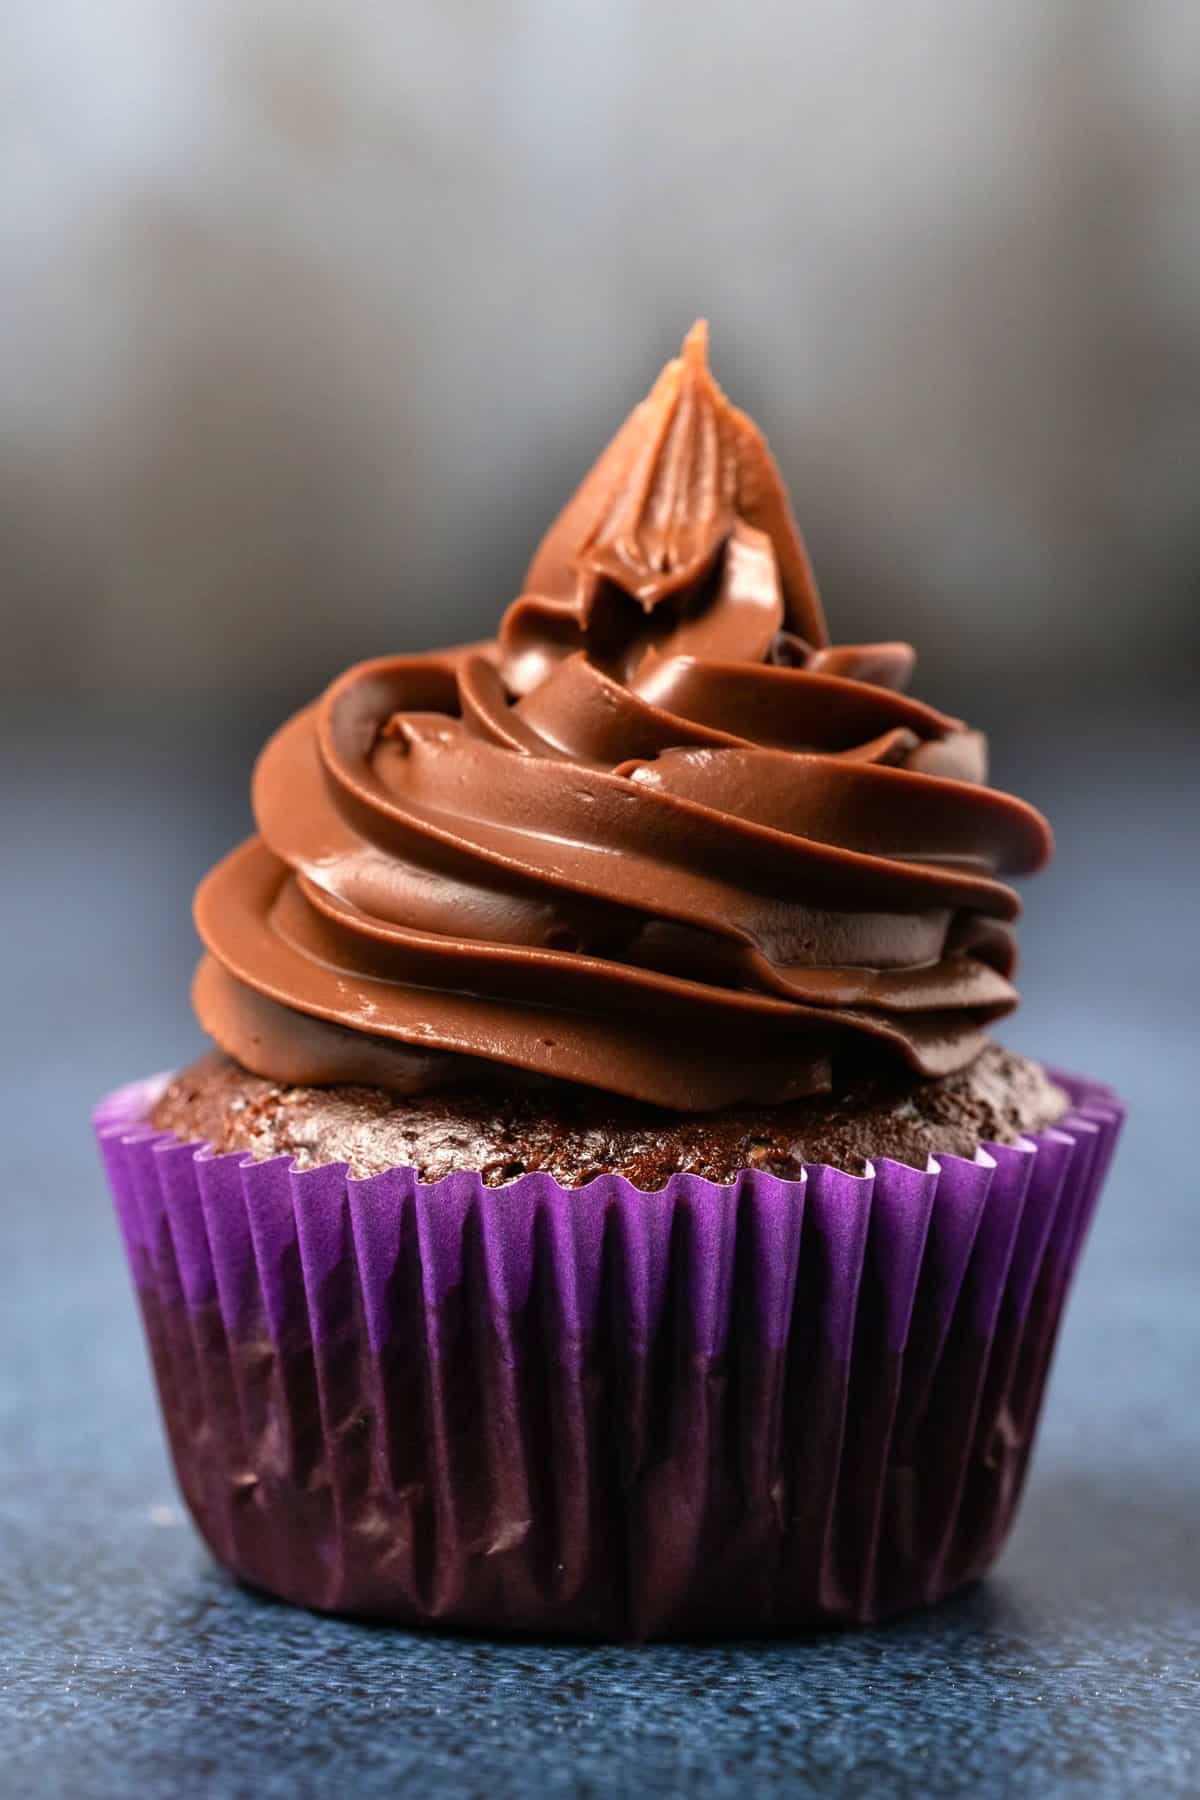 Chocolate cupcake with vegan ganache frosting piped on top. 